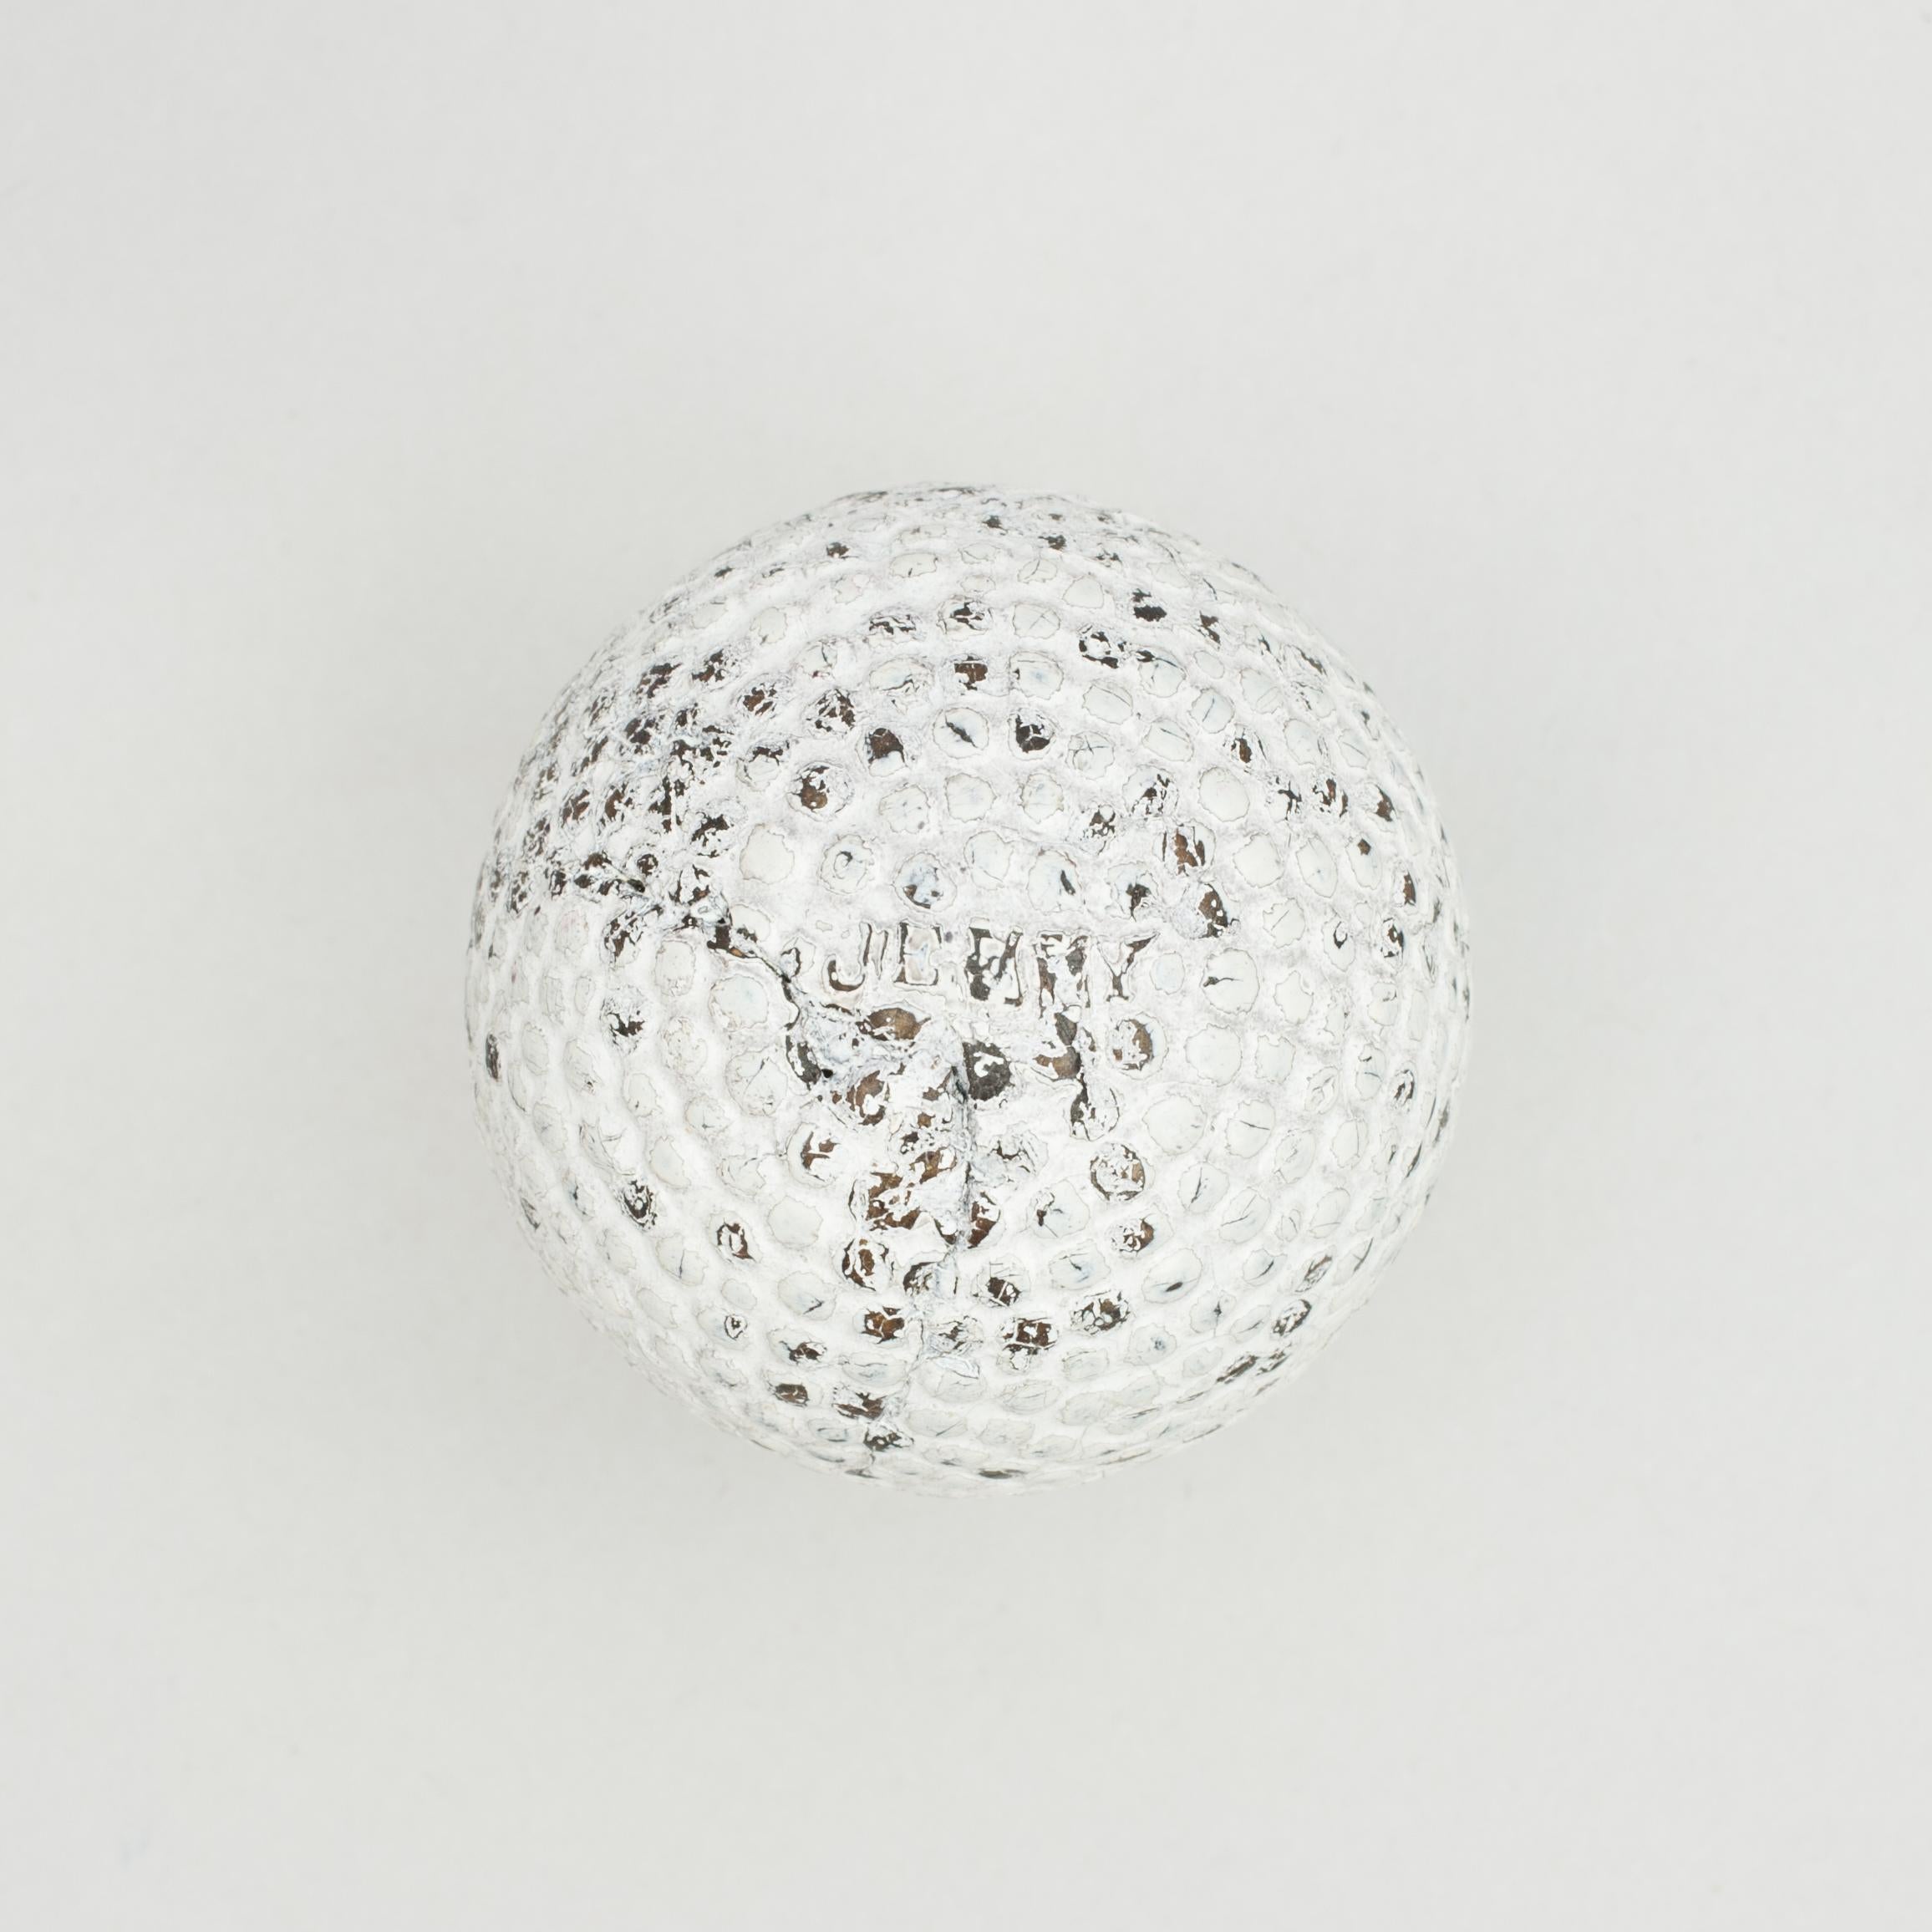 Bramble Pattern Golf Ball, Jenny.
A rare example of a bramble patterned golf ball. The golf ball is in good condition and is marked 'JENNY' on both poles. It is not the usual classic bramble pattern, they appear to be more circular on all four